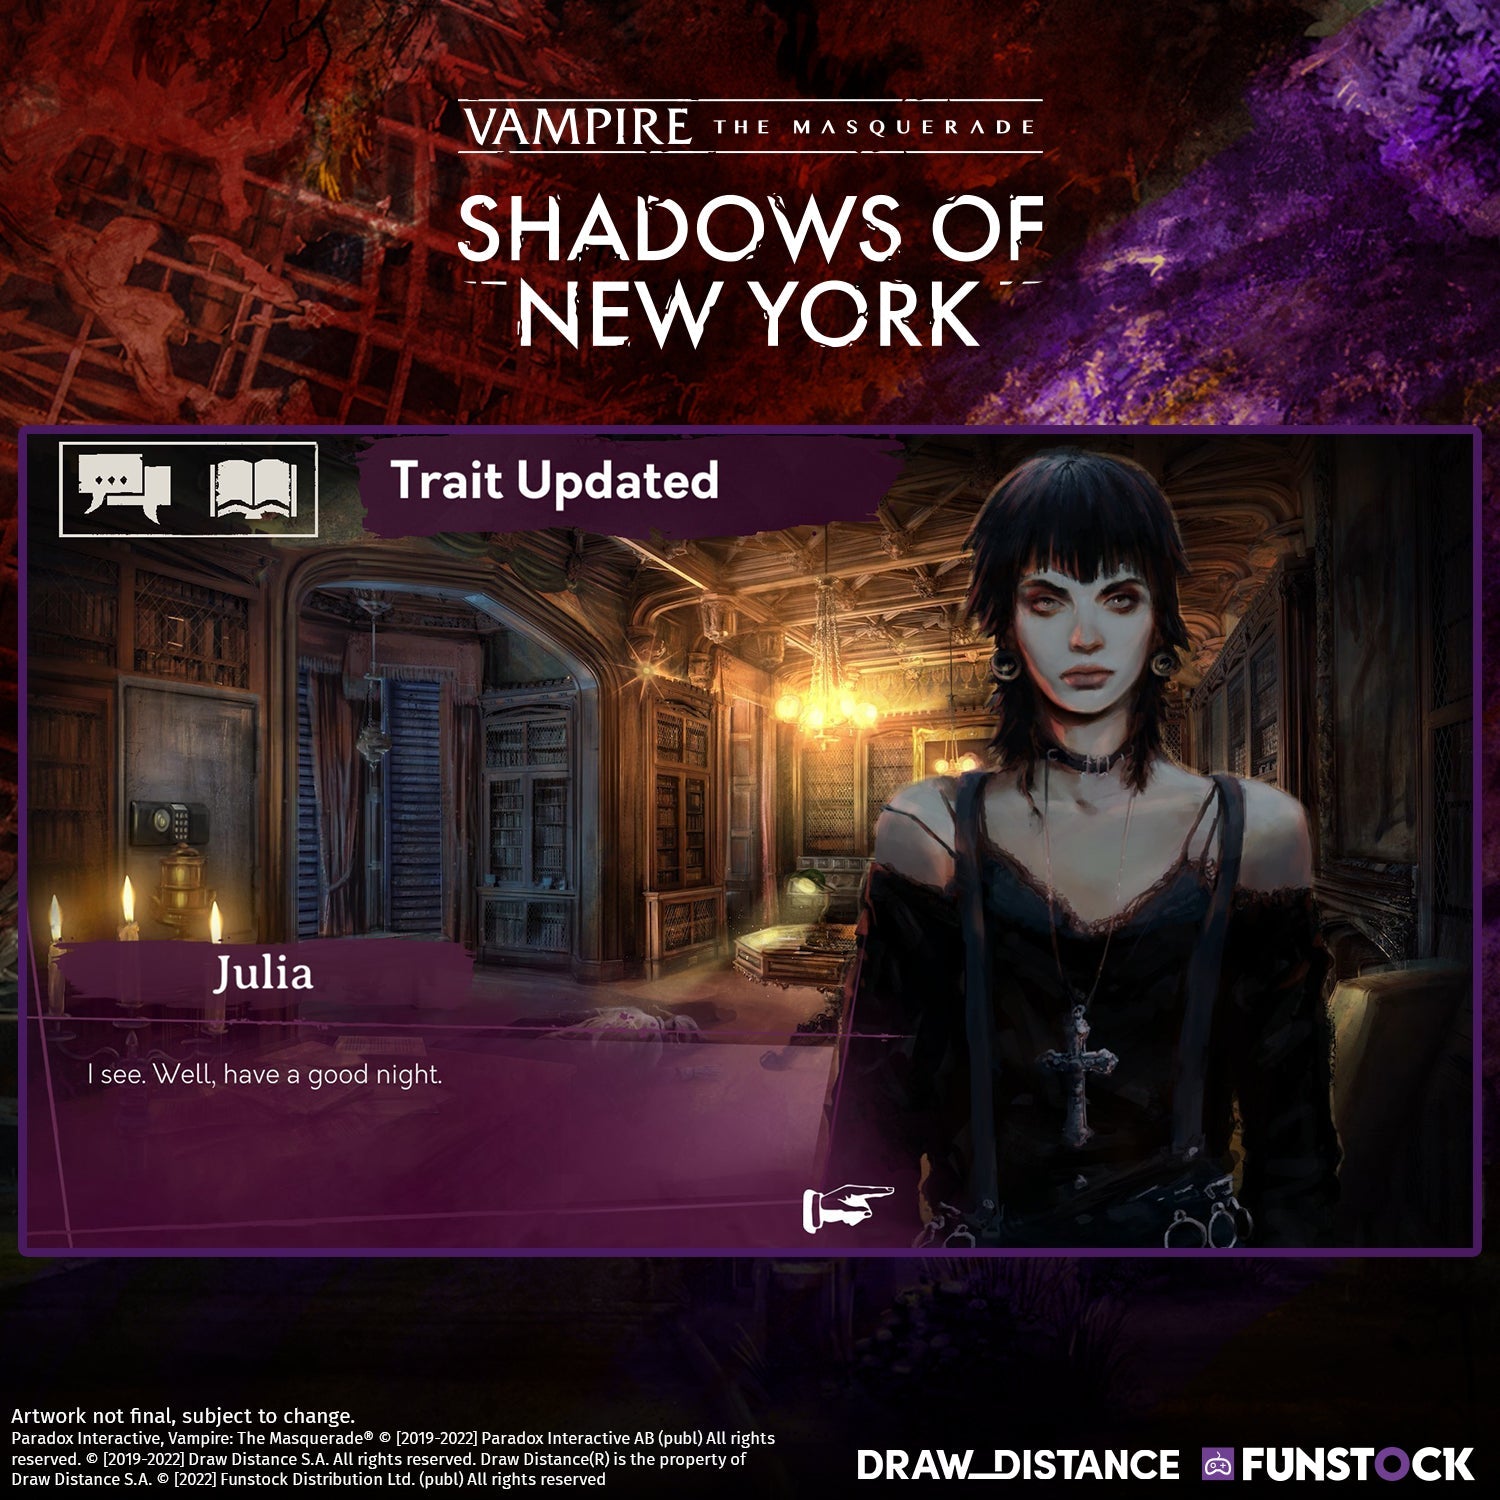 Vampire: The Masquerade Getting New York Double-Pack Physical Release  Soon